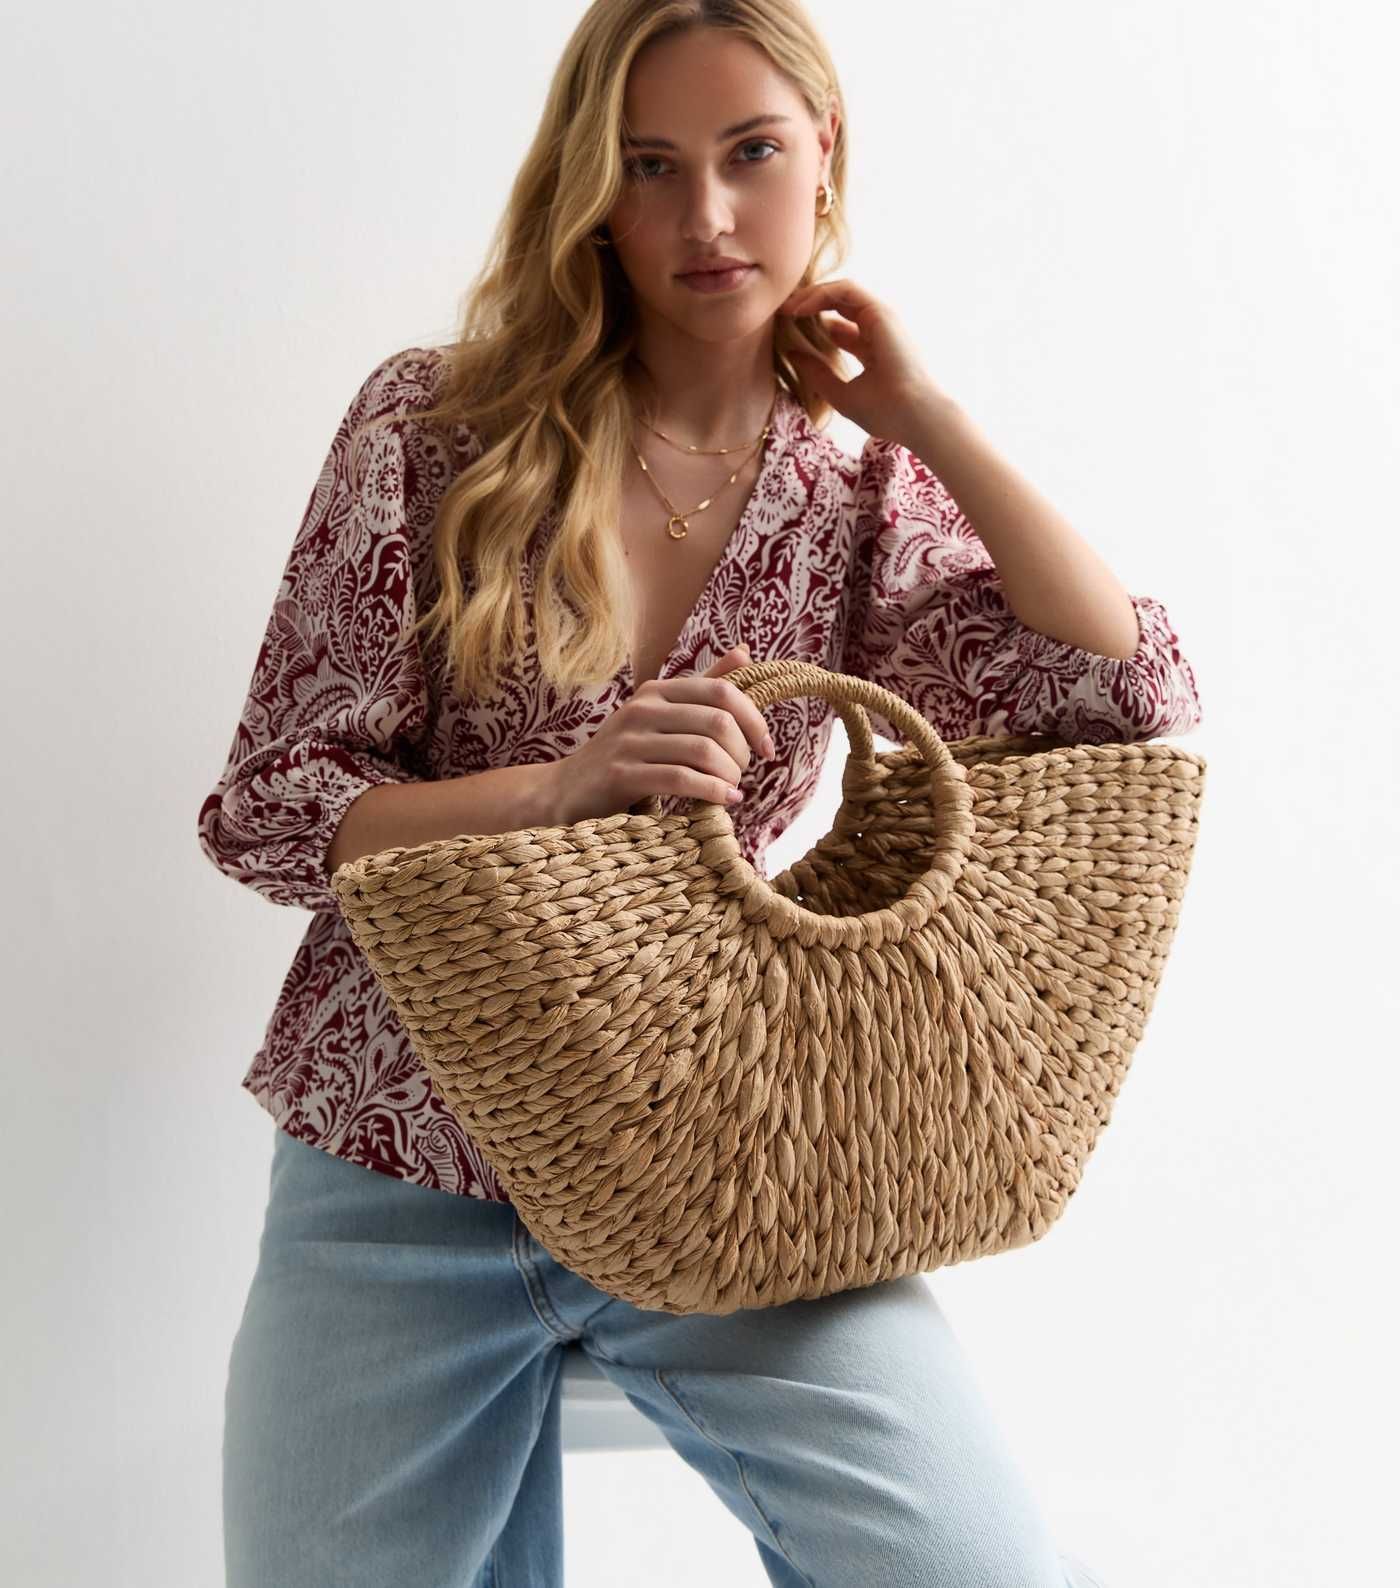 Tan Raffia Basket Bag
						
						Add to Saved Items
						Remove from Saved Items | New Look (UK)